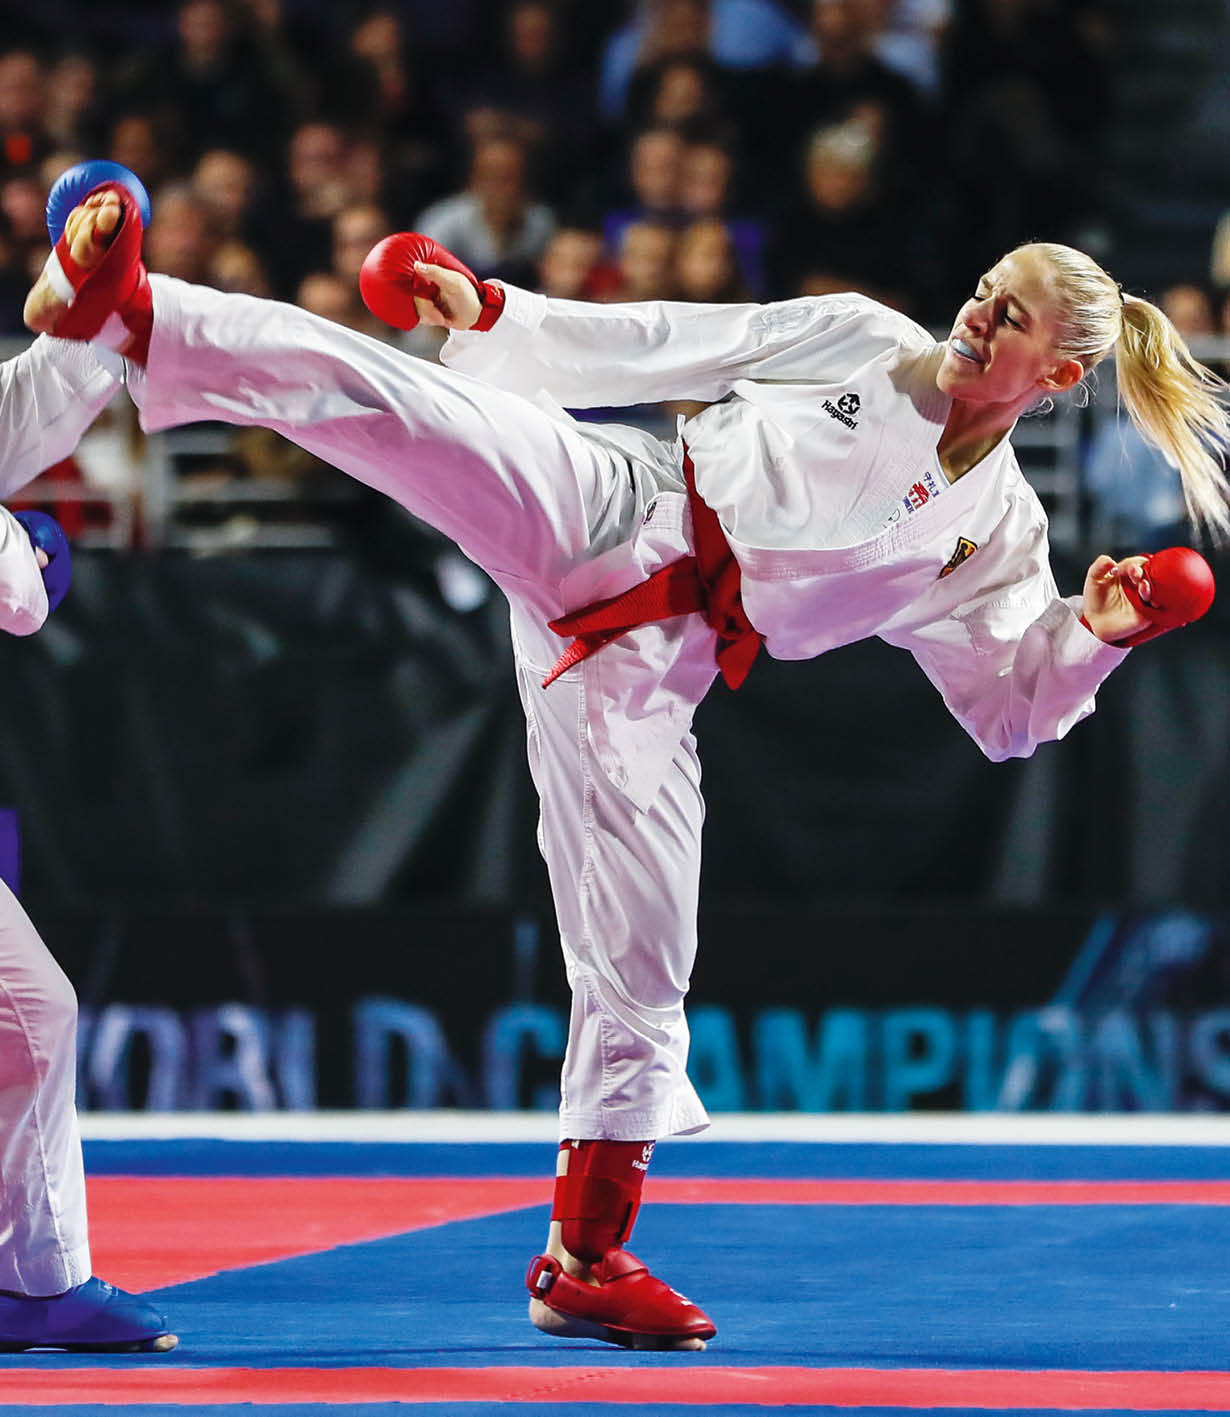 Bitsch Jana (GER) figth with Banaszczyk Dorota (POL) for the gold medal and win the tournament of Female Kumite -55 Kg during the Finals of Karate World Championship celebrates in Wizink Center, Madrid, Spain, on November 10th, 2018   